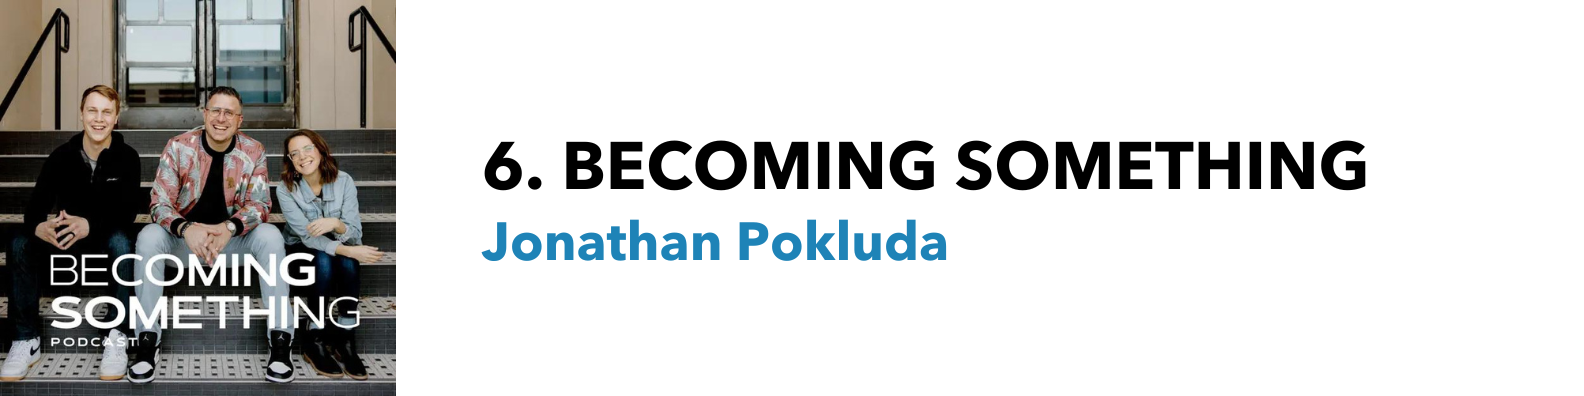 <a href="https://podcasts.apple.com/us/podcast/becoming-something-with-jonathan-pokluda/id1454045768">Listen on Apple Podcasts</a>